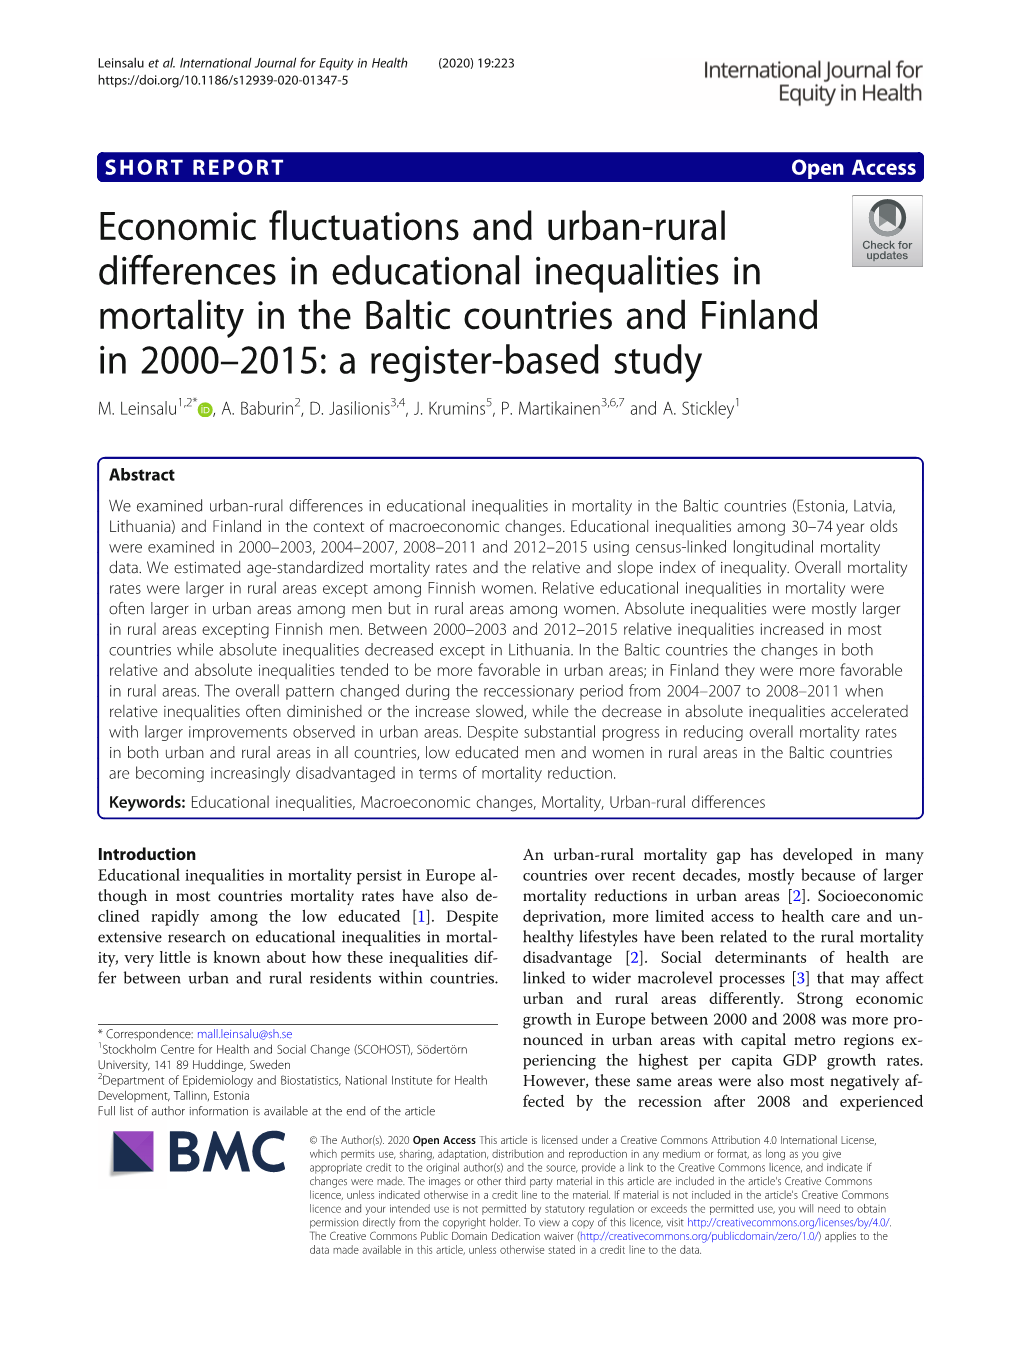 Economic Fluctuations and Urban-Rural Differences in Educational Inequalities in Mortality in the Baltic Countries and Finland in 2000–2015: a Register-Based Study M